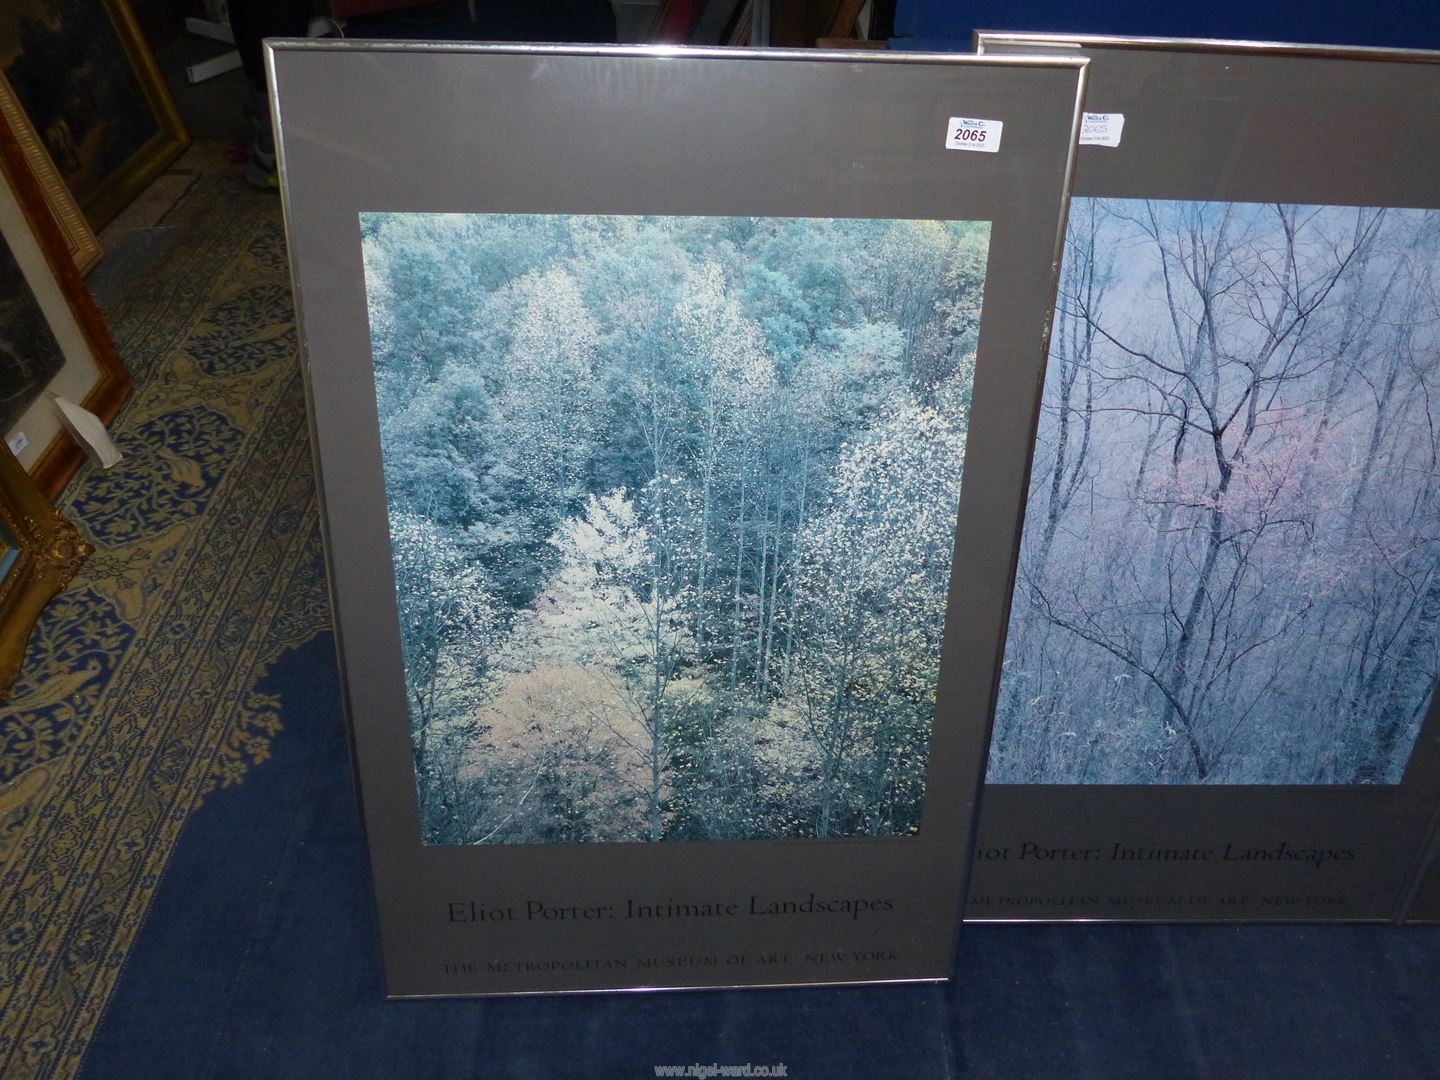 Three Eliot Porter 'Intimate Landscapes' photographs of forests, Met. - Image 2 of 4